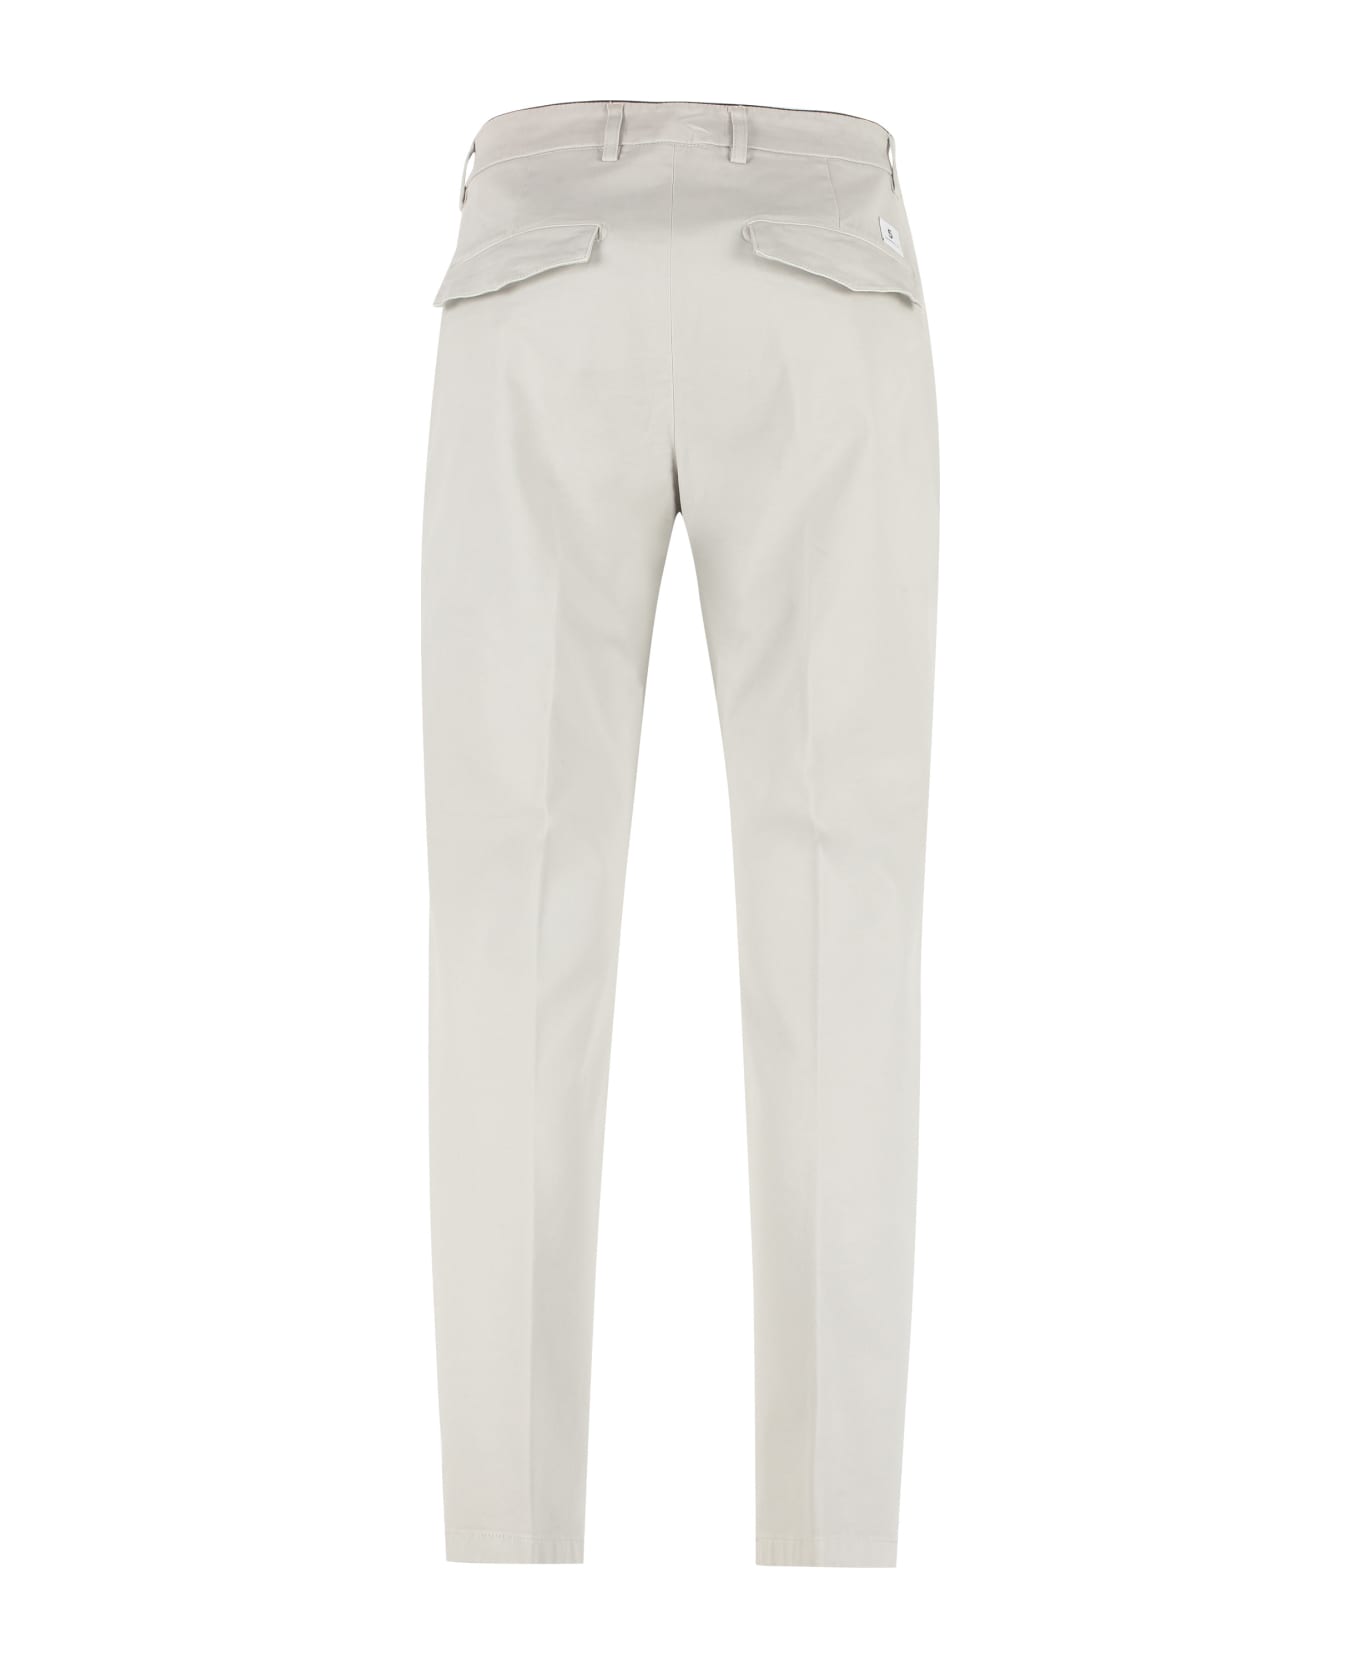 Department Five Prince Cotton Chino Trousers - grey